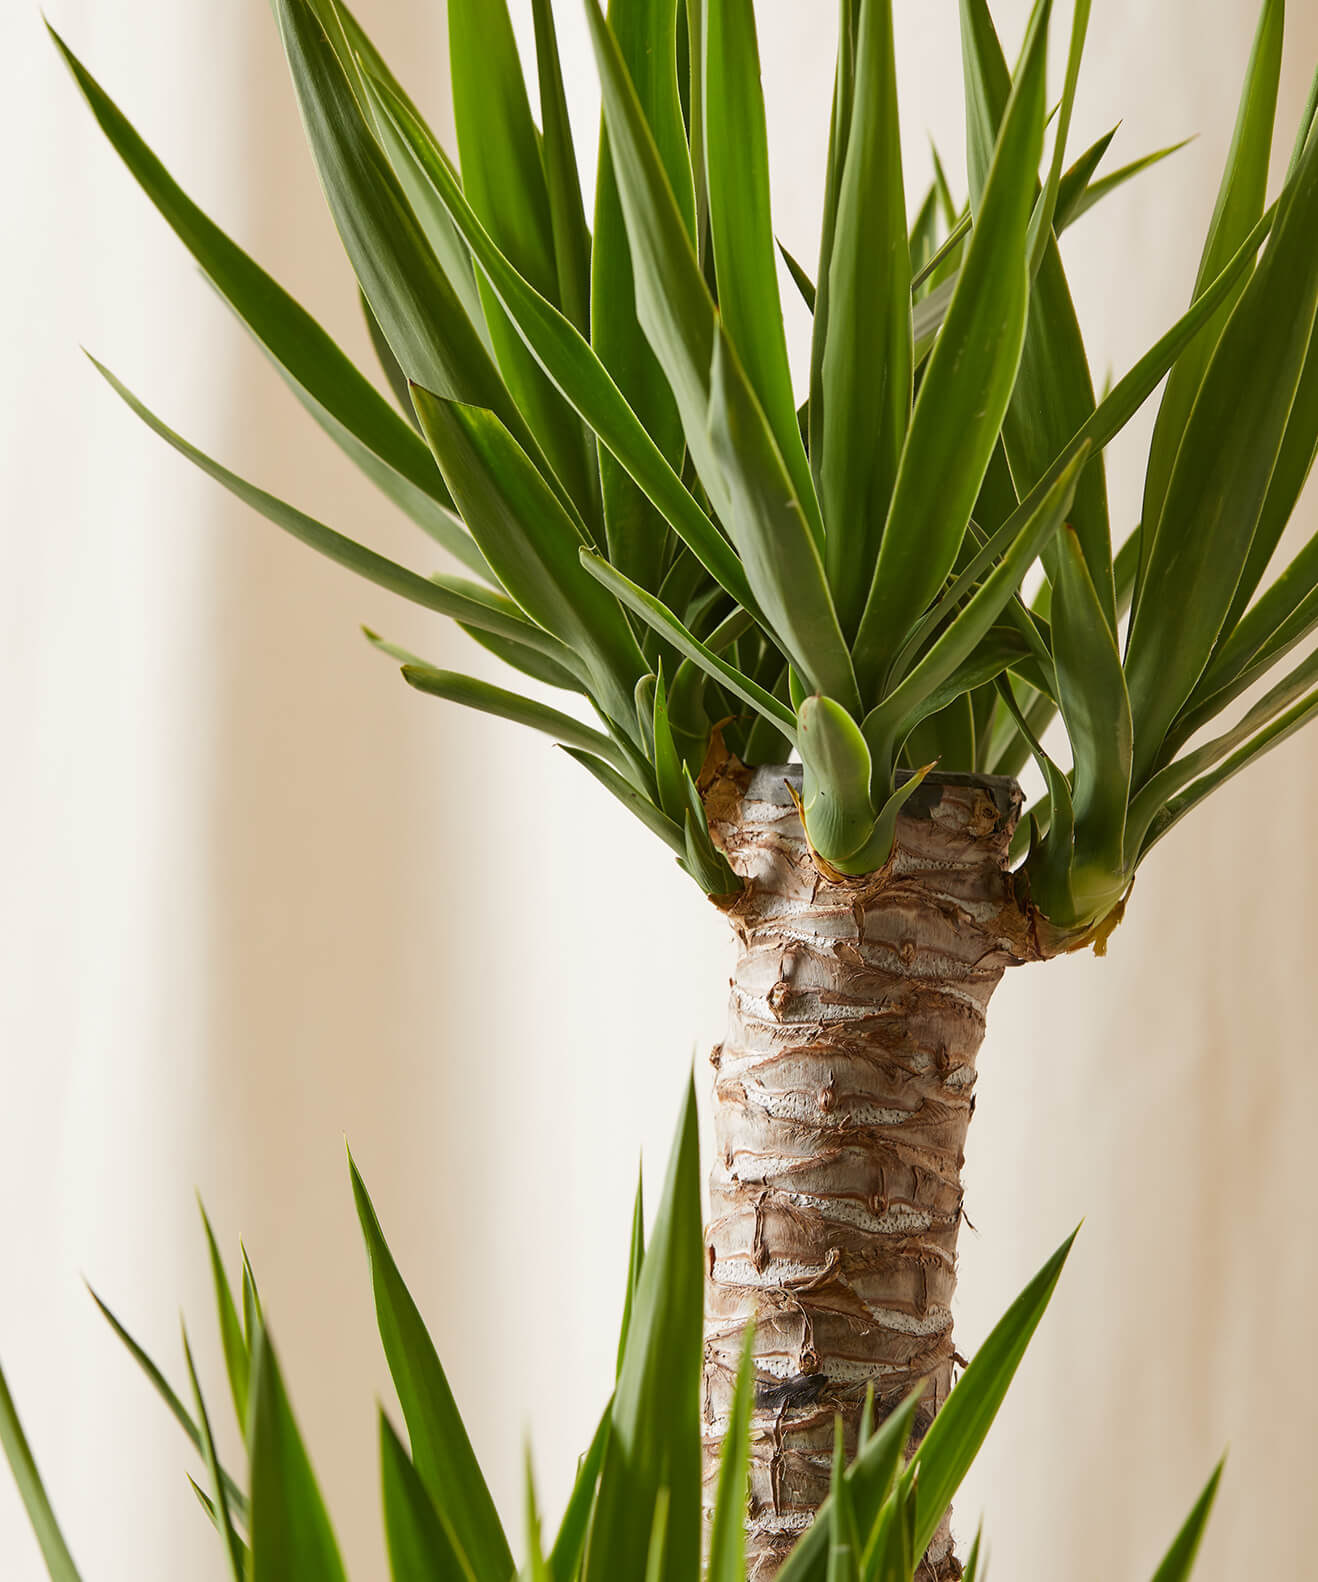 yucca cane 101: how to care for yucca canes | bloomscape